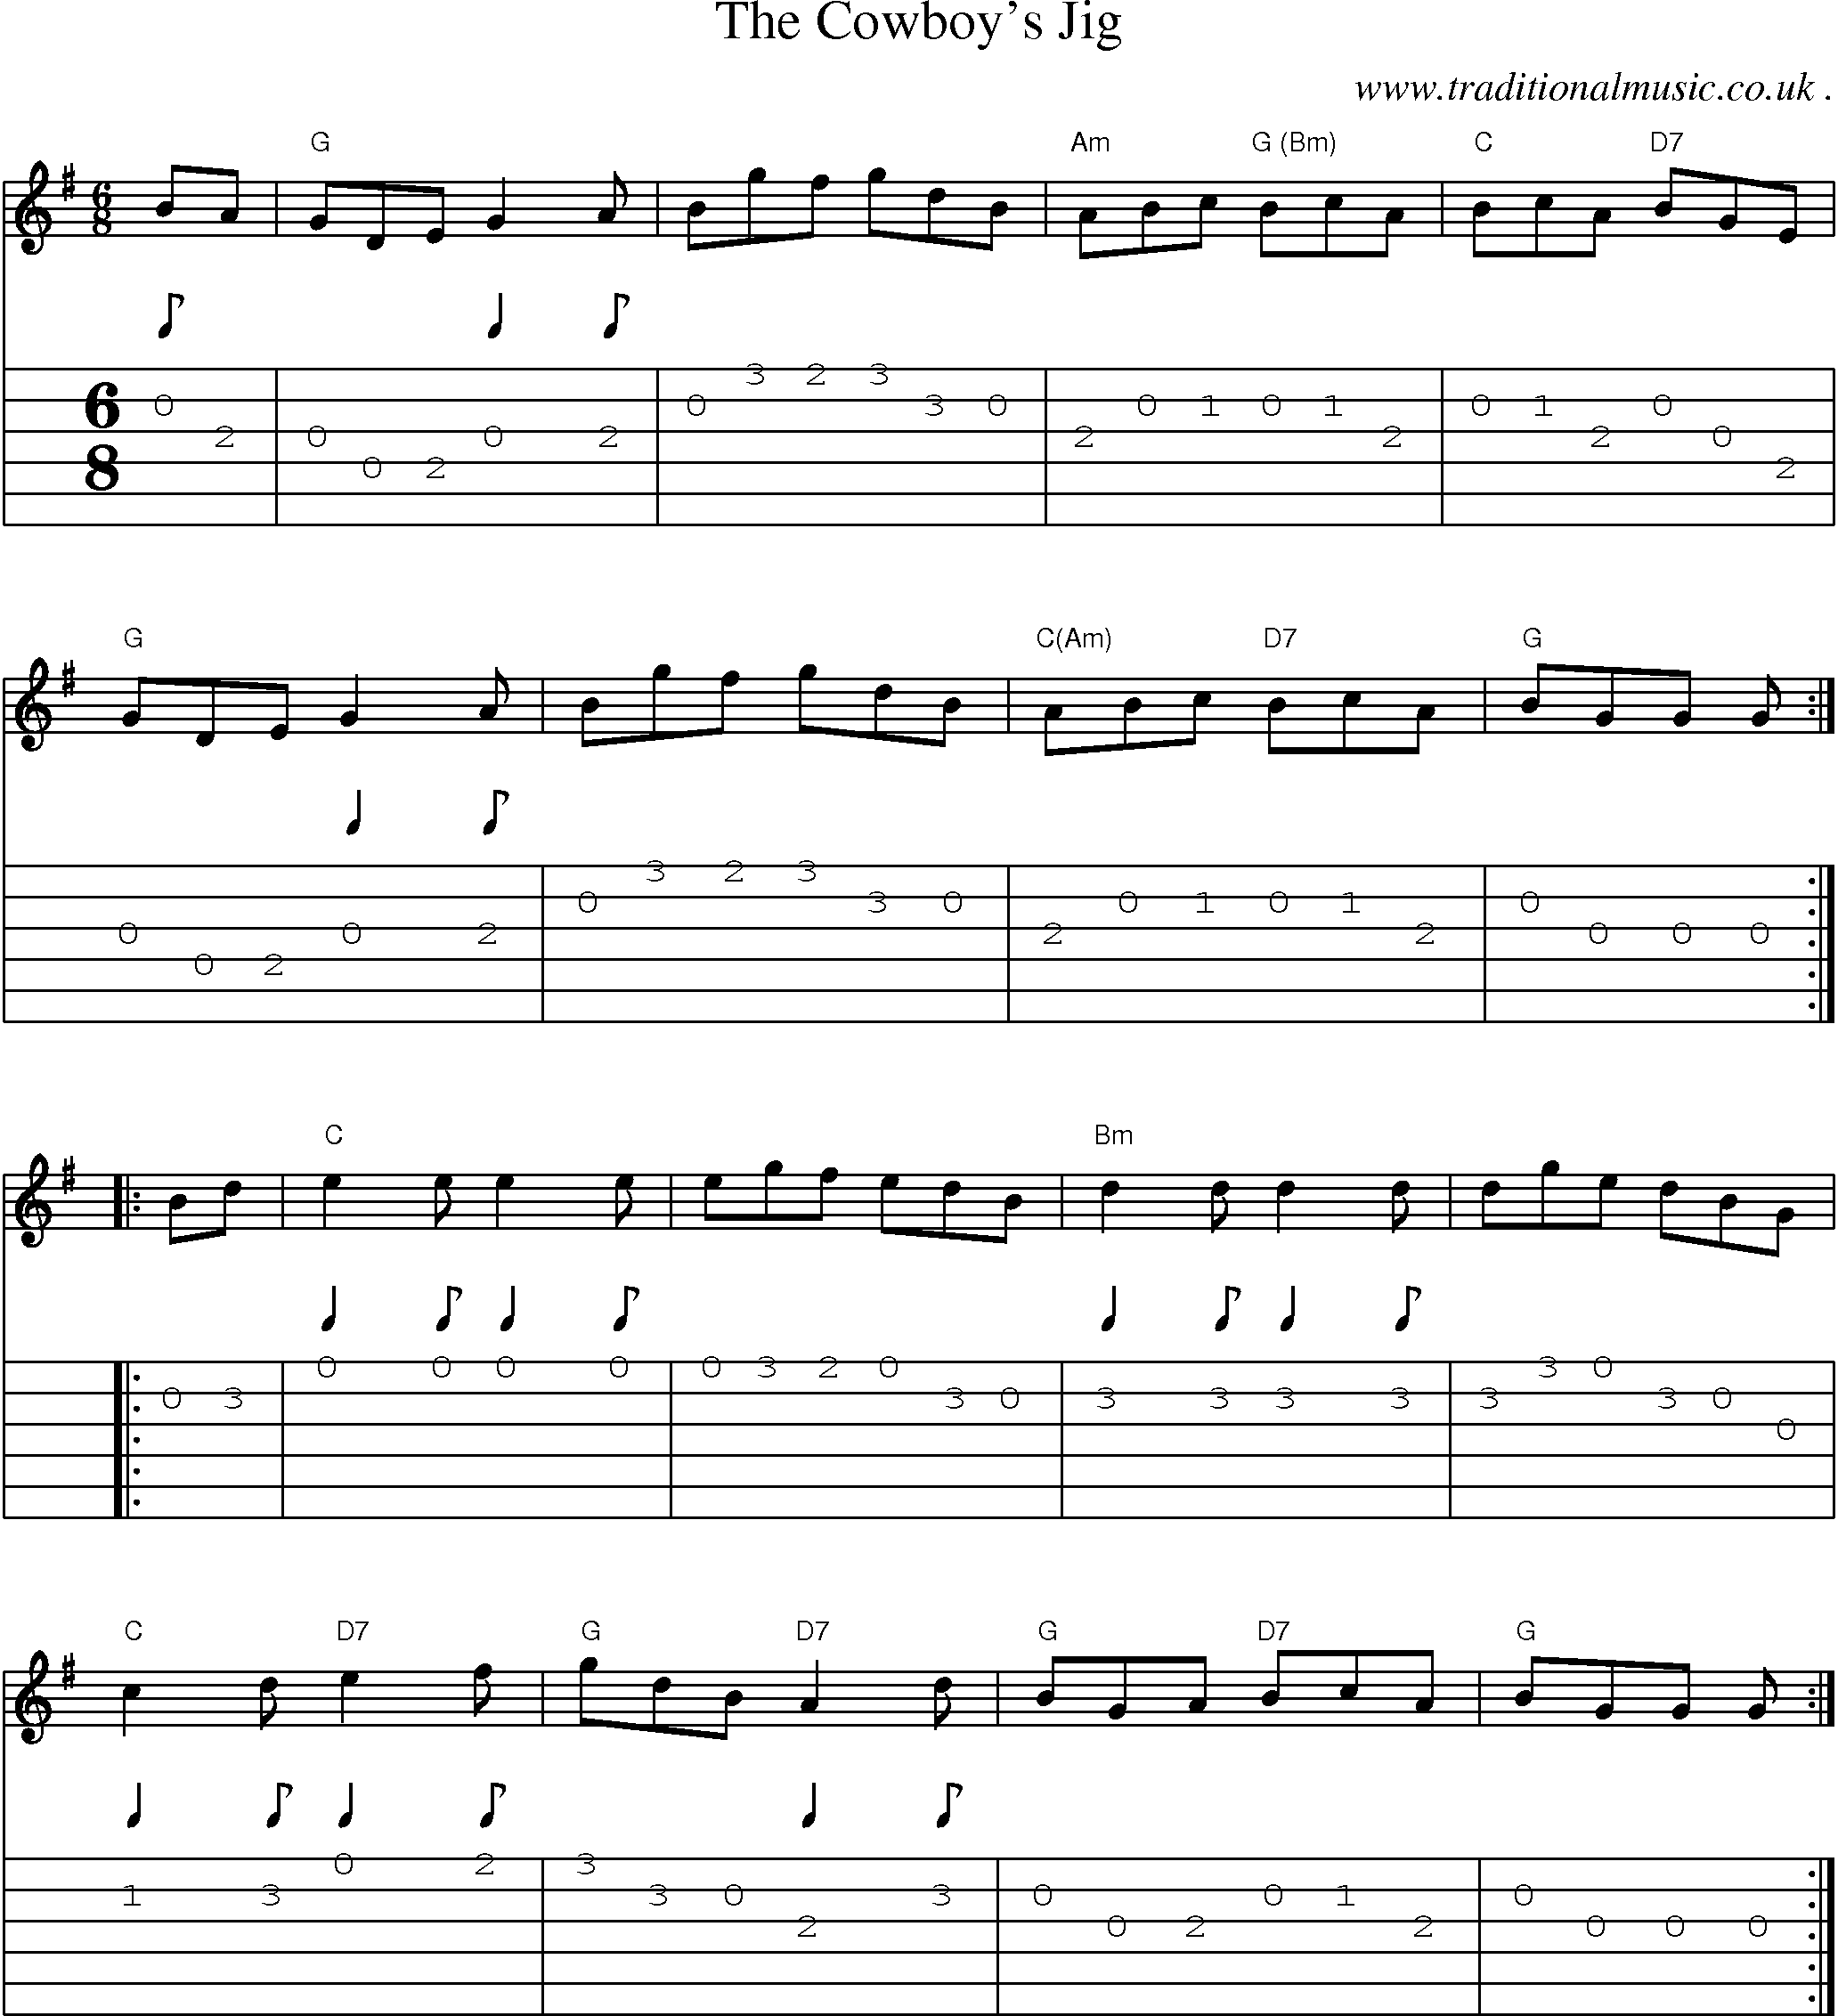 Music Score and Guitar Tabs for The Cowboys Jig